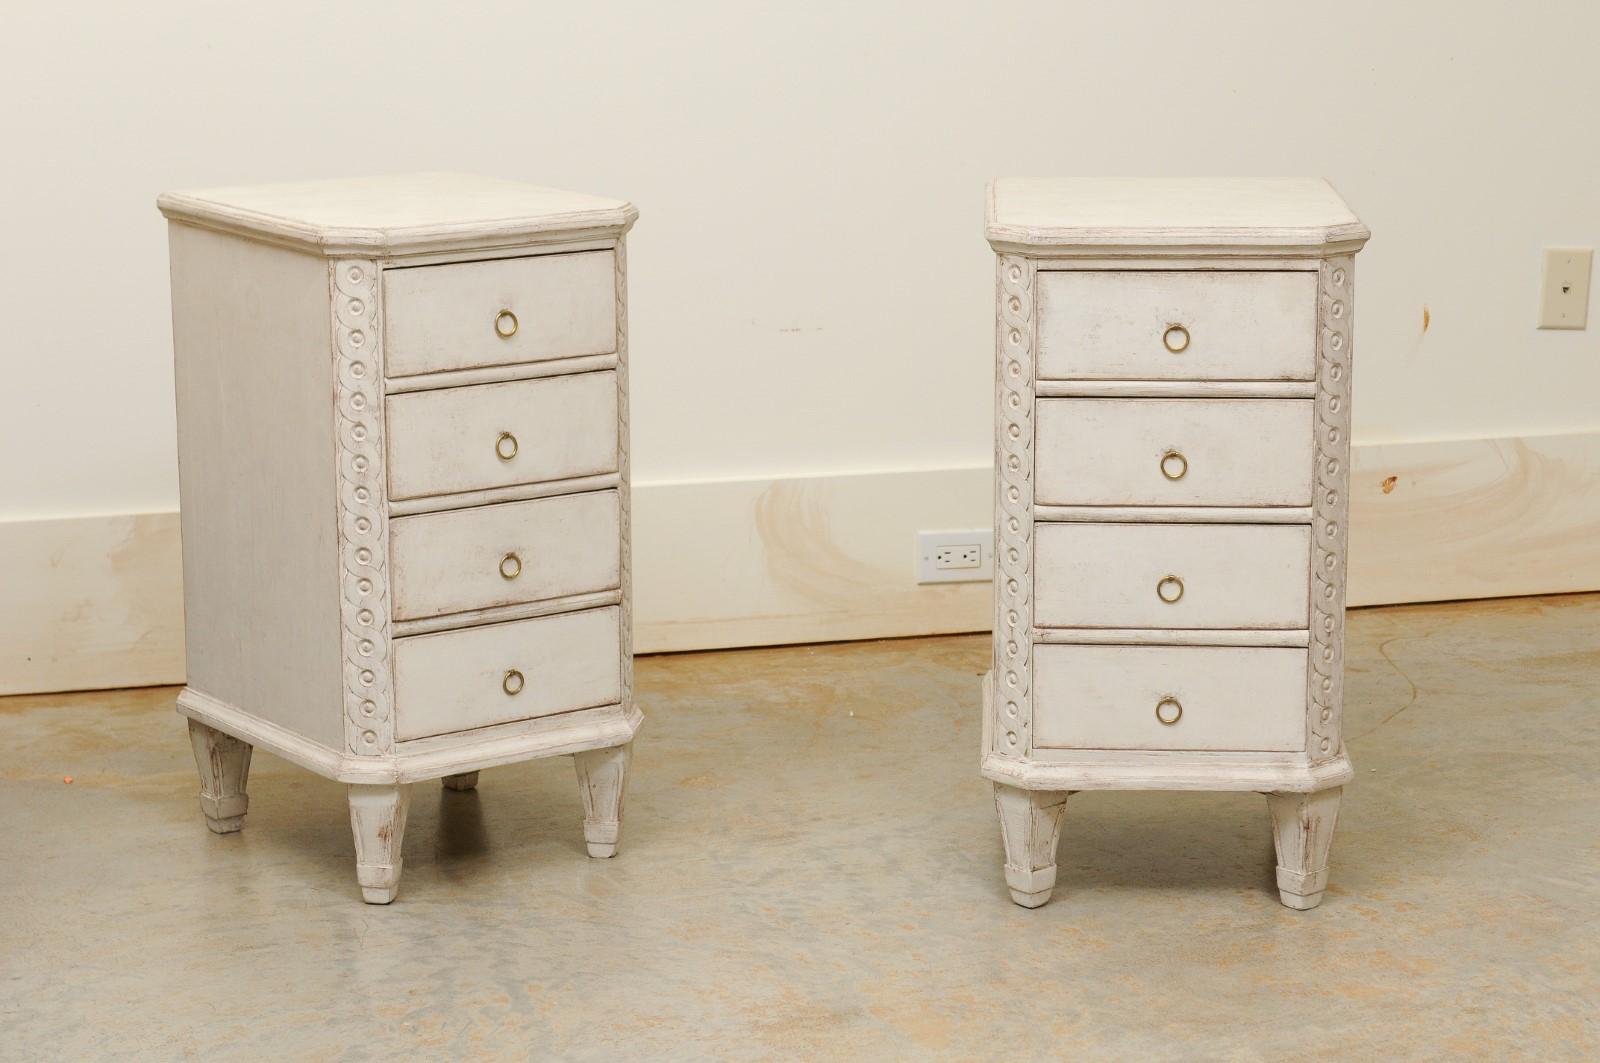 A pair of Swedish neoclassical style painted nightstand tables from the 19th century, with guilloche motifs, drawers and canted sides. Created in Sweden during the 19th century, each of this pair of bedside tables features a rectangular top with